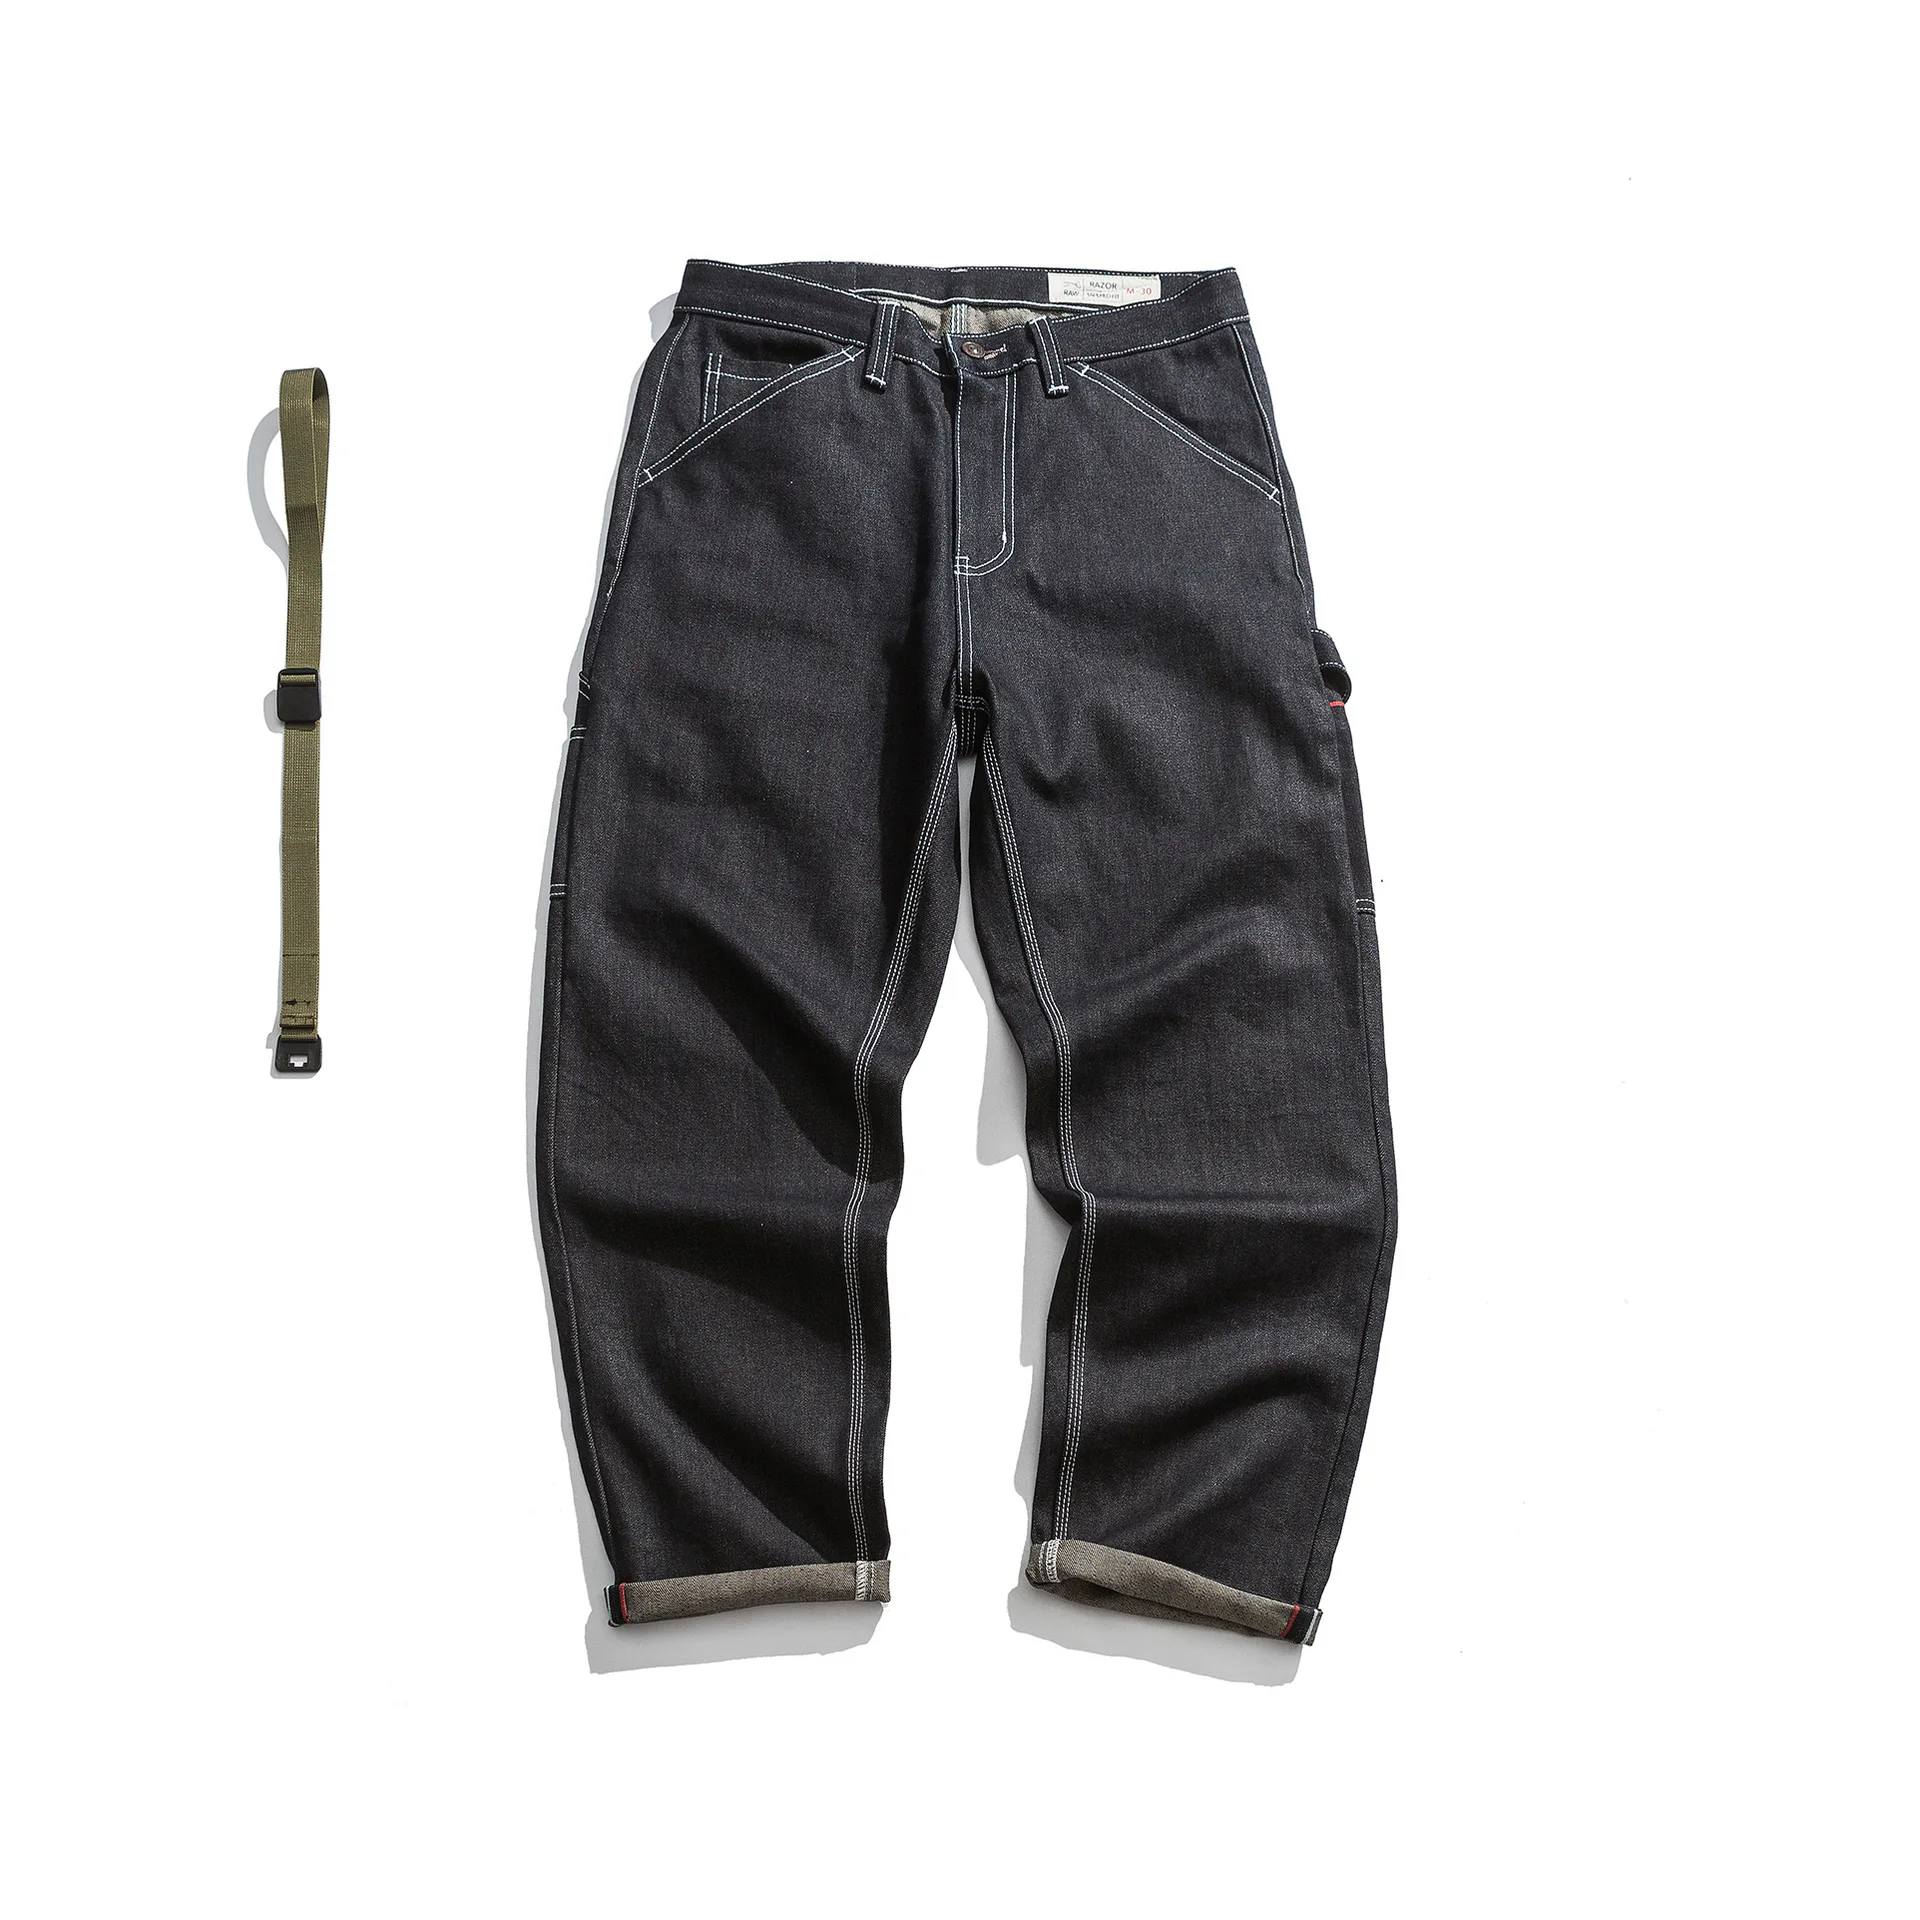  Selvage Overalls Jeans